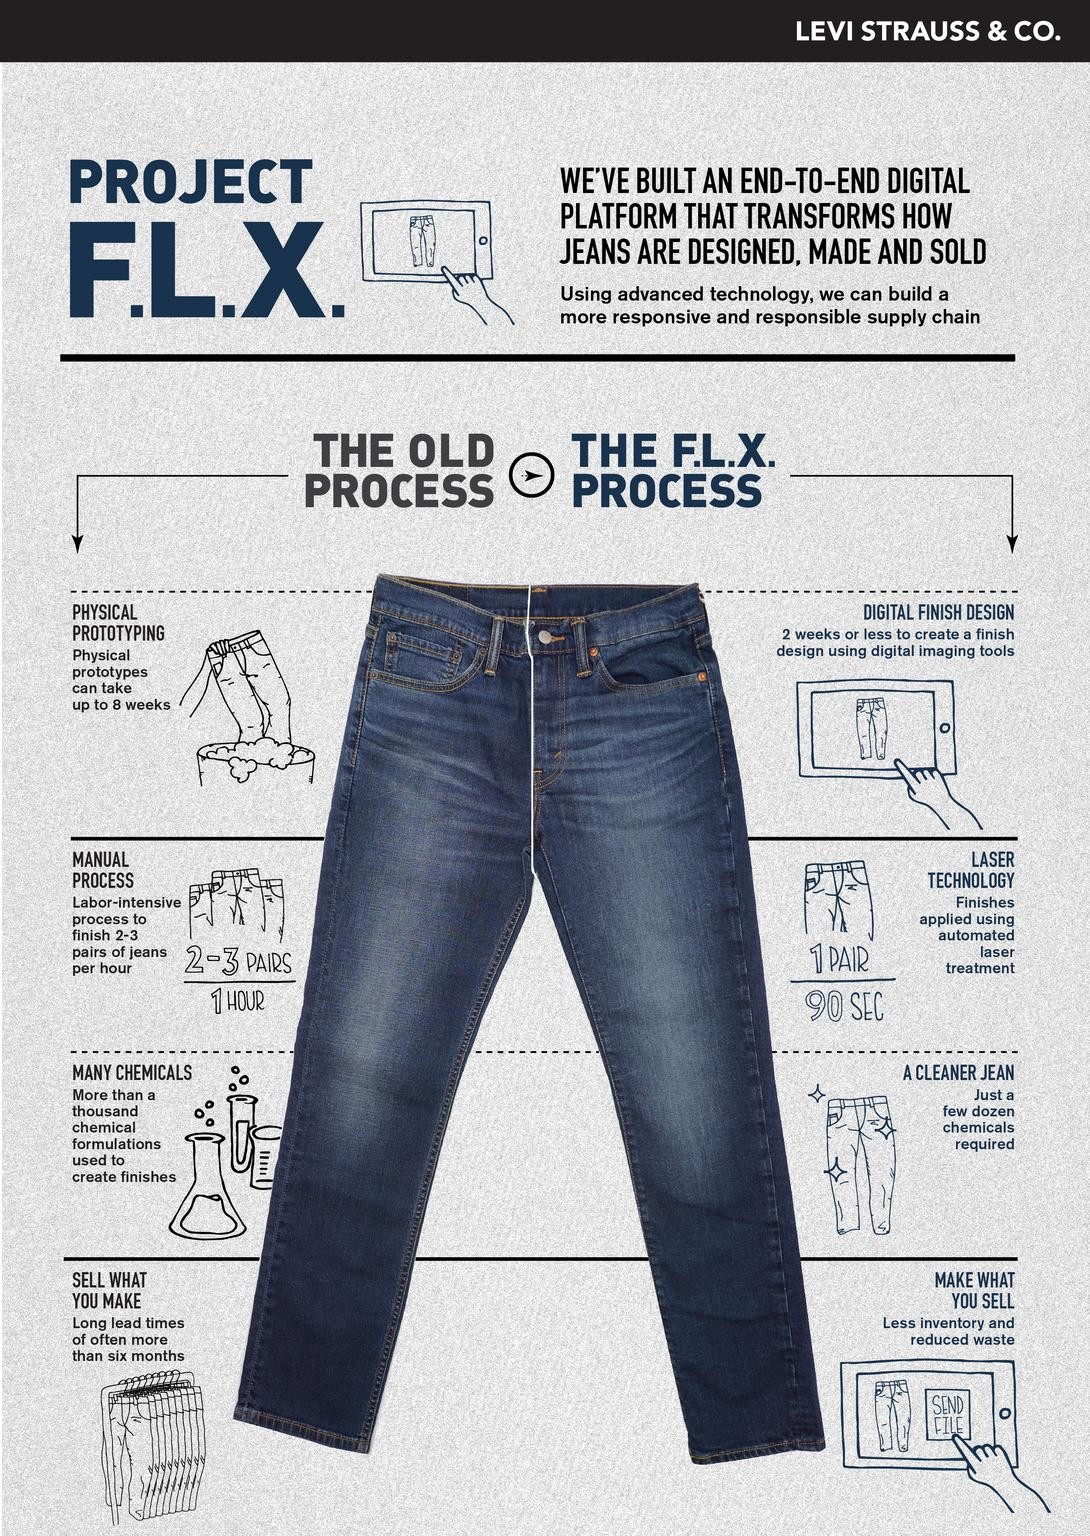 Project F.L.X. by Levi Strauss & Co. (LS&Co.)